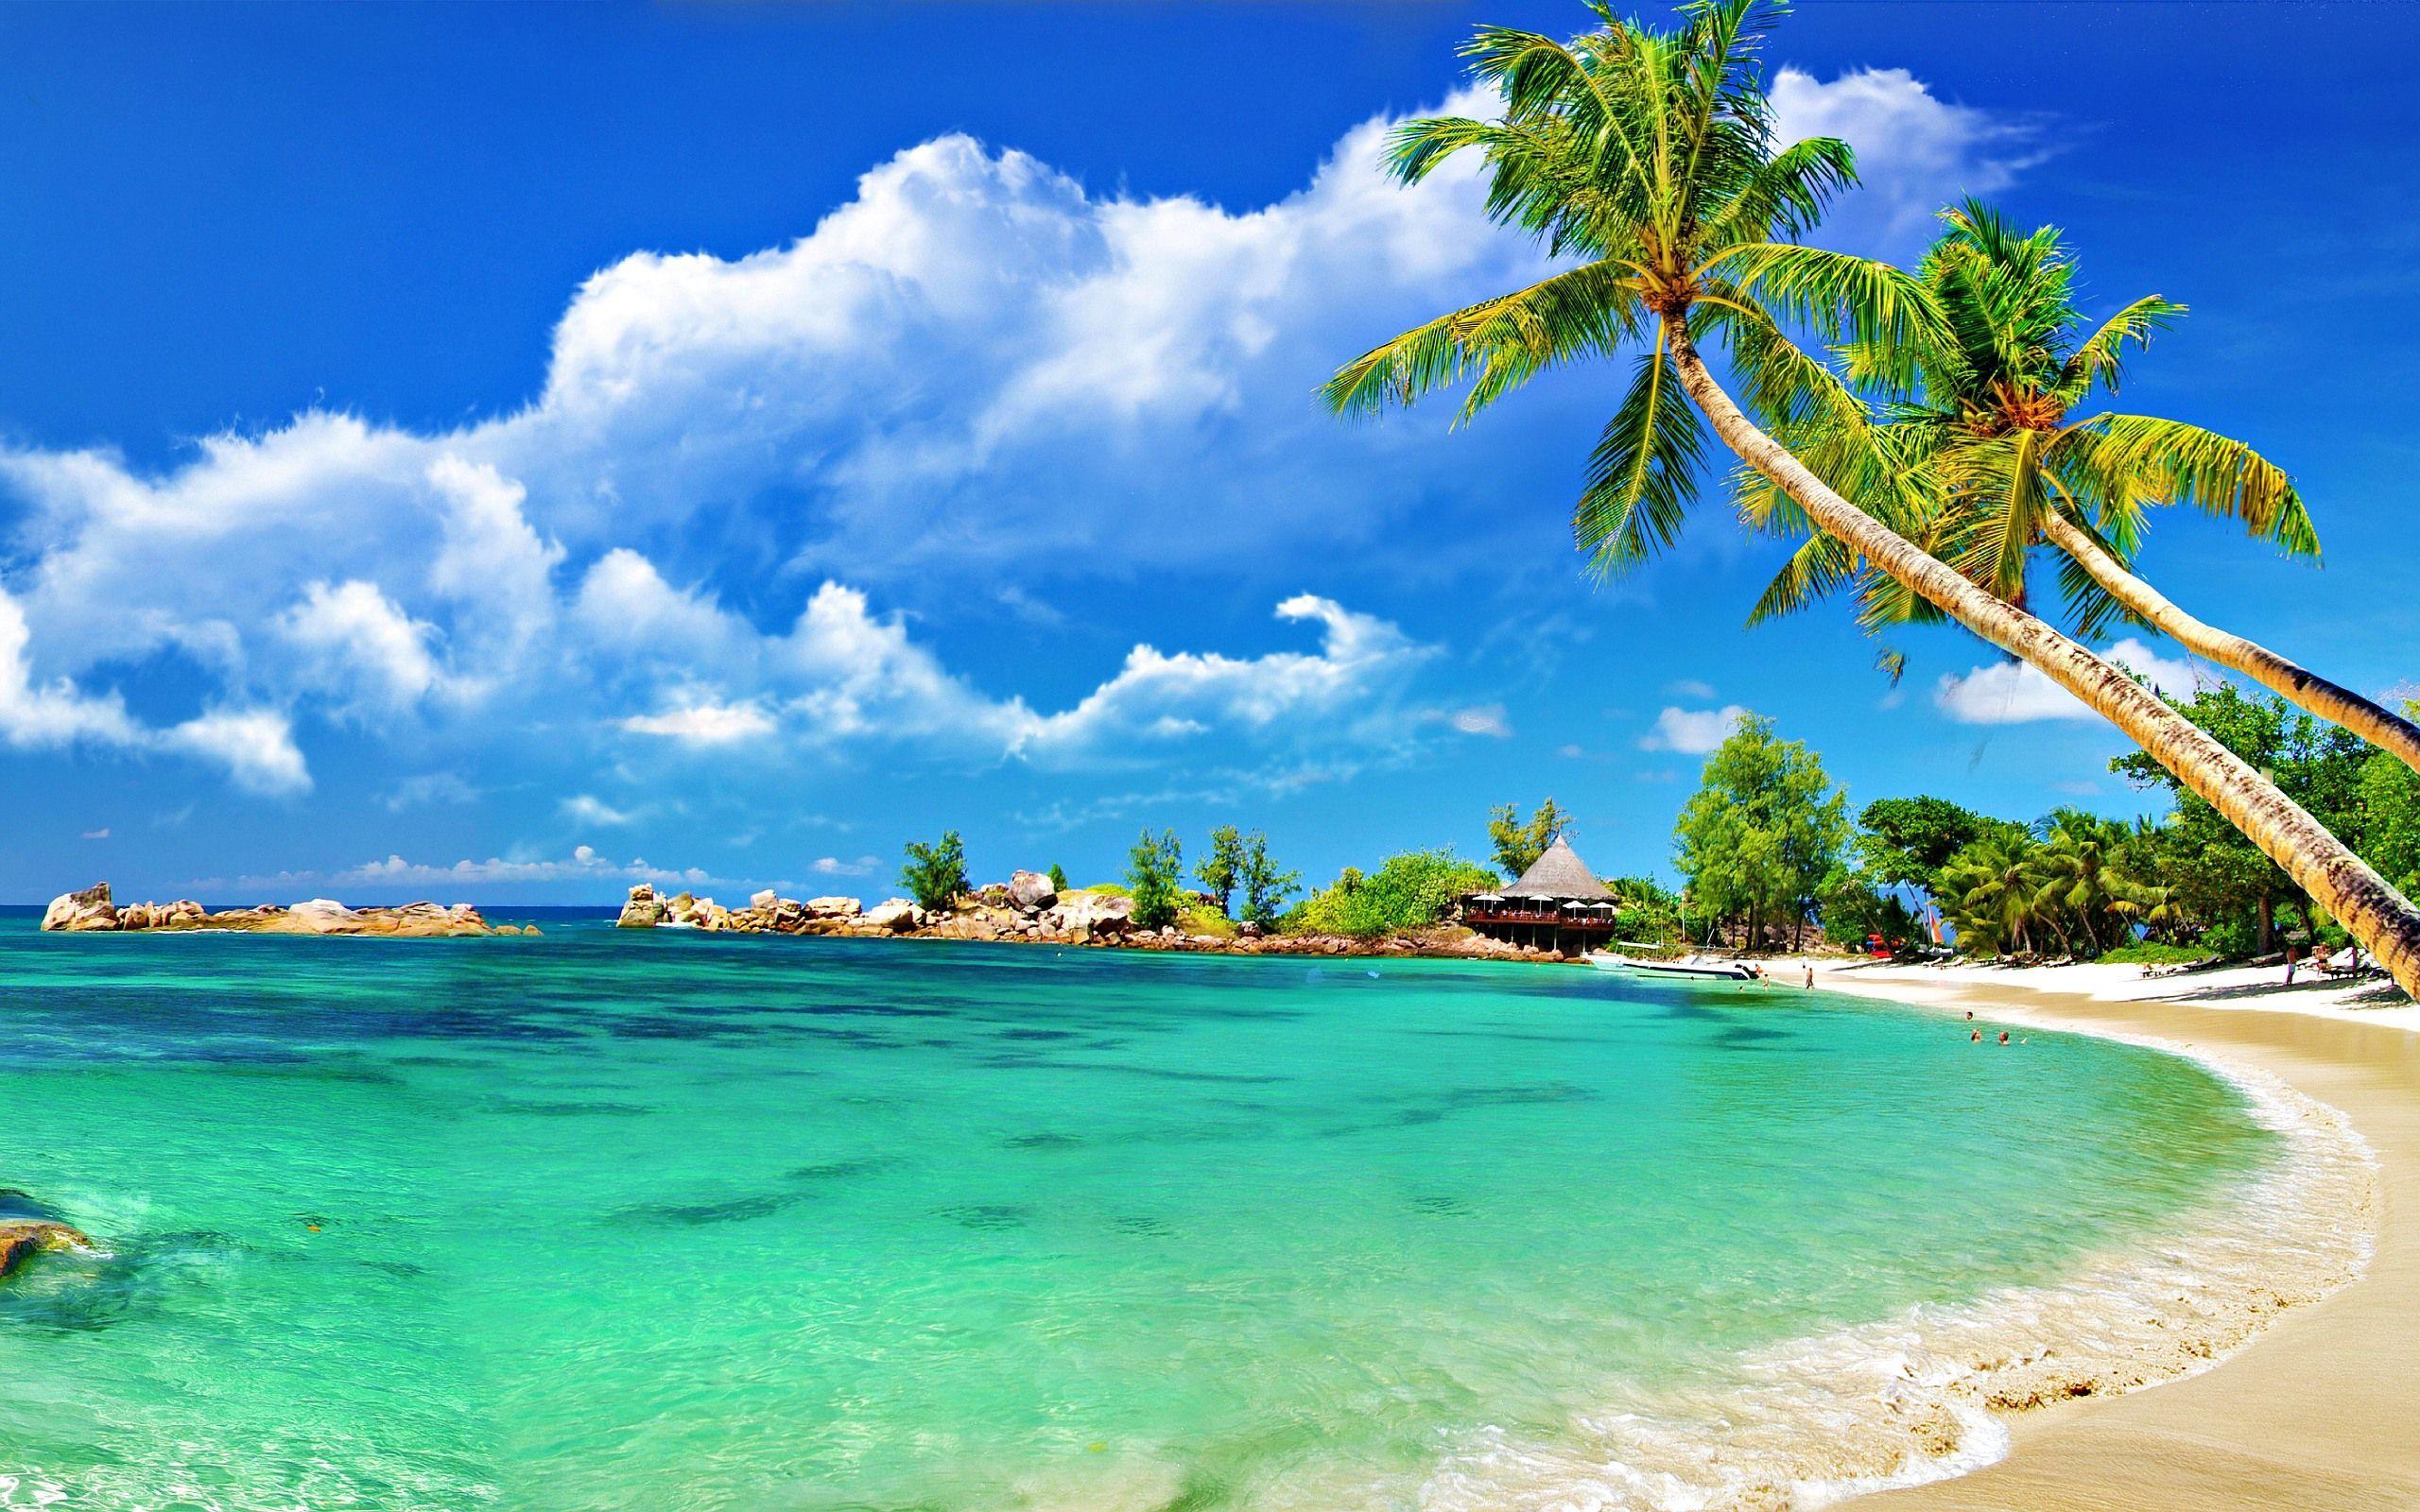 50 AMAZING BEACH WALLPAPERS FREE TO DOWNLOAD